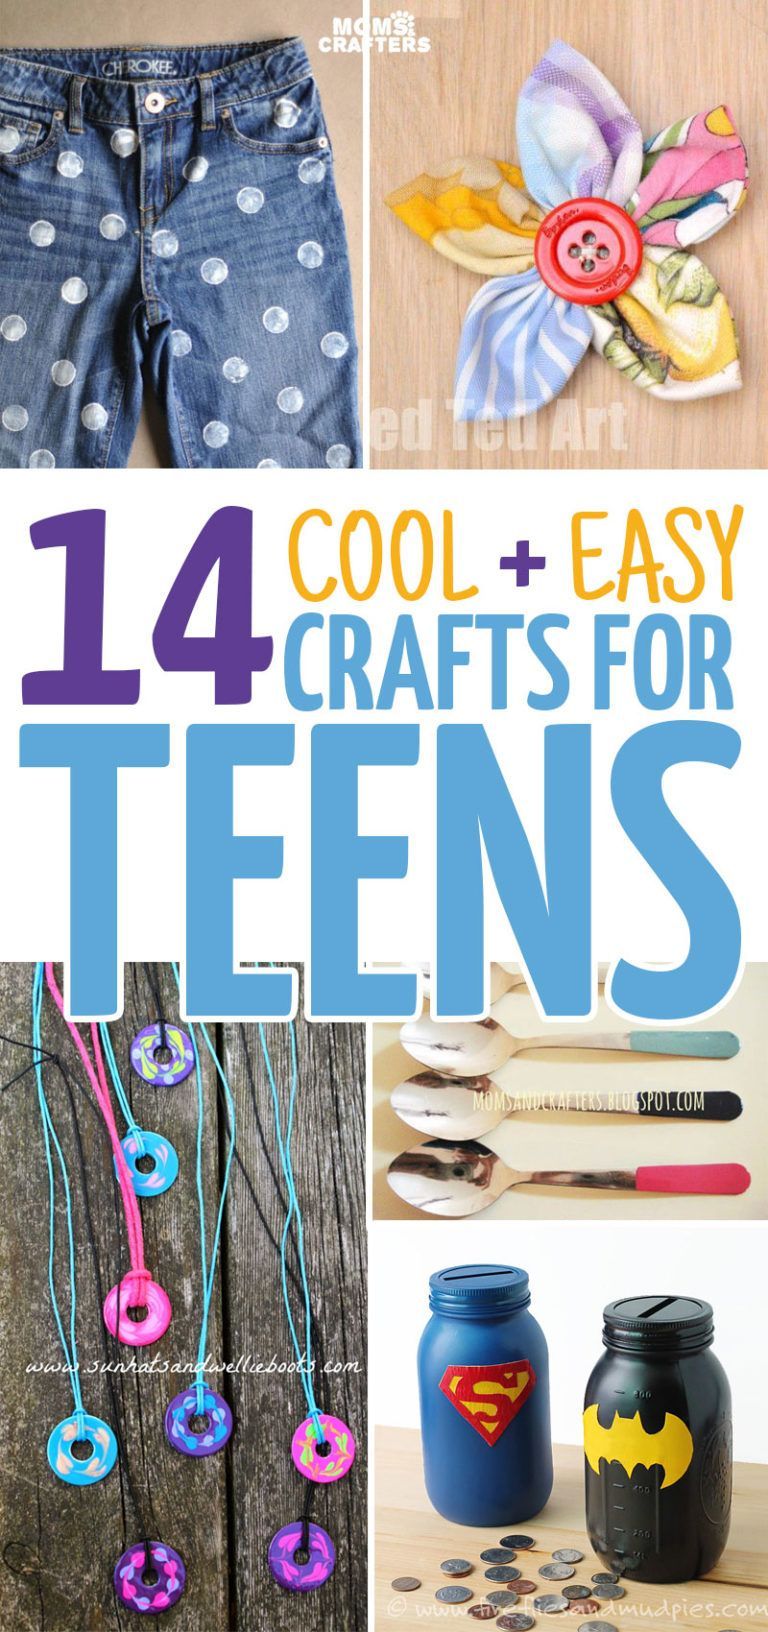 14 Cool + Easy Crafts for Teens -   25 cool crafts with paper
 ideas